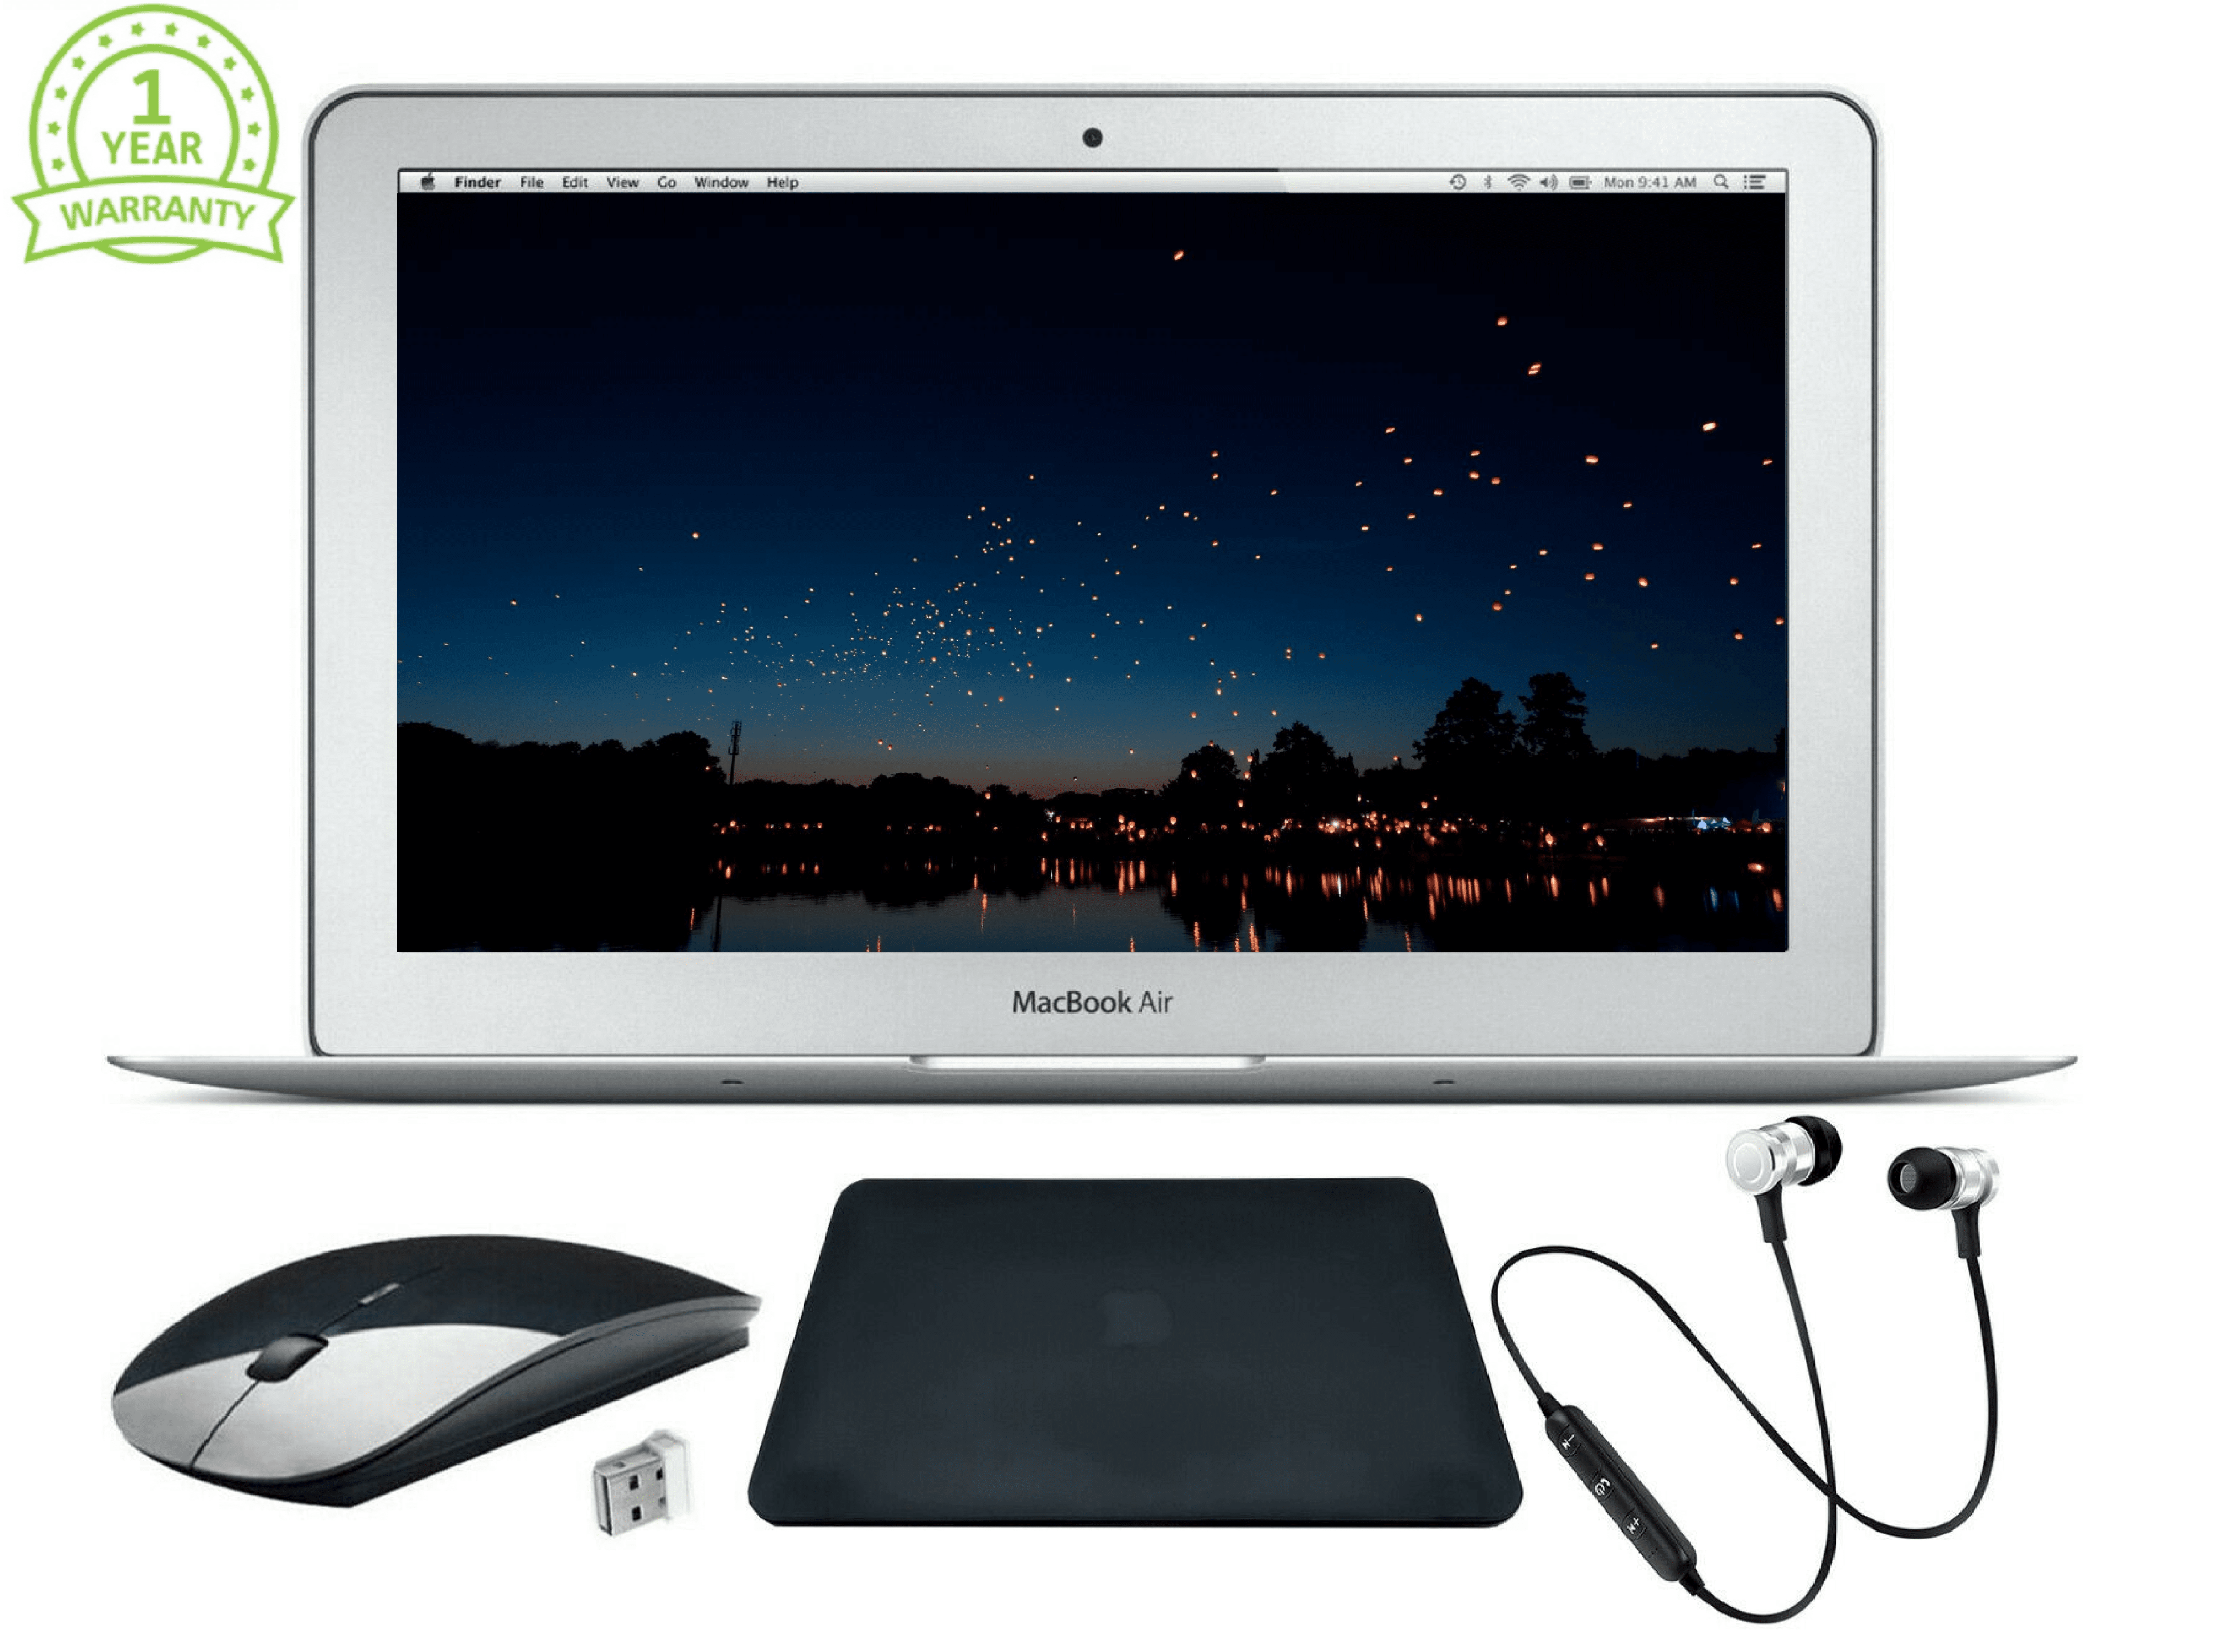 Apple Macbook Air 11.6" Laptop Bundle Includes: Generic Case, Wireless Headset, Bluetooth Mouse, 1 Year Warranty & Priority Shipping! [4GB RAM] [128GB SSD] (Refurbished)